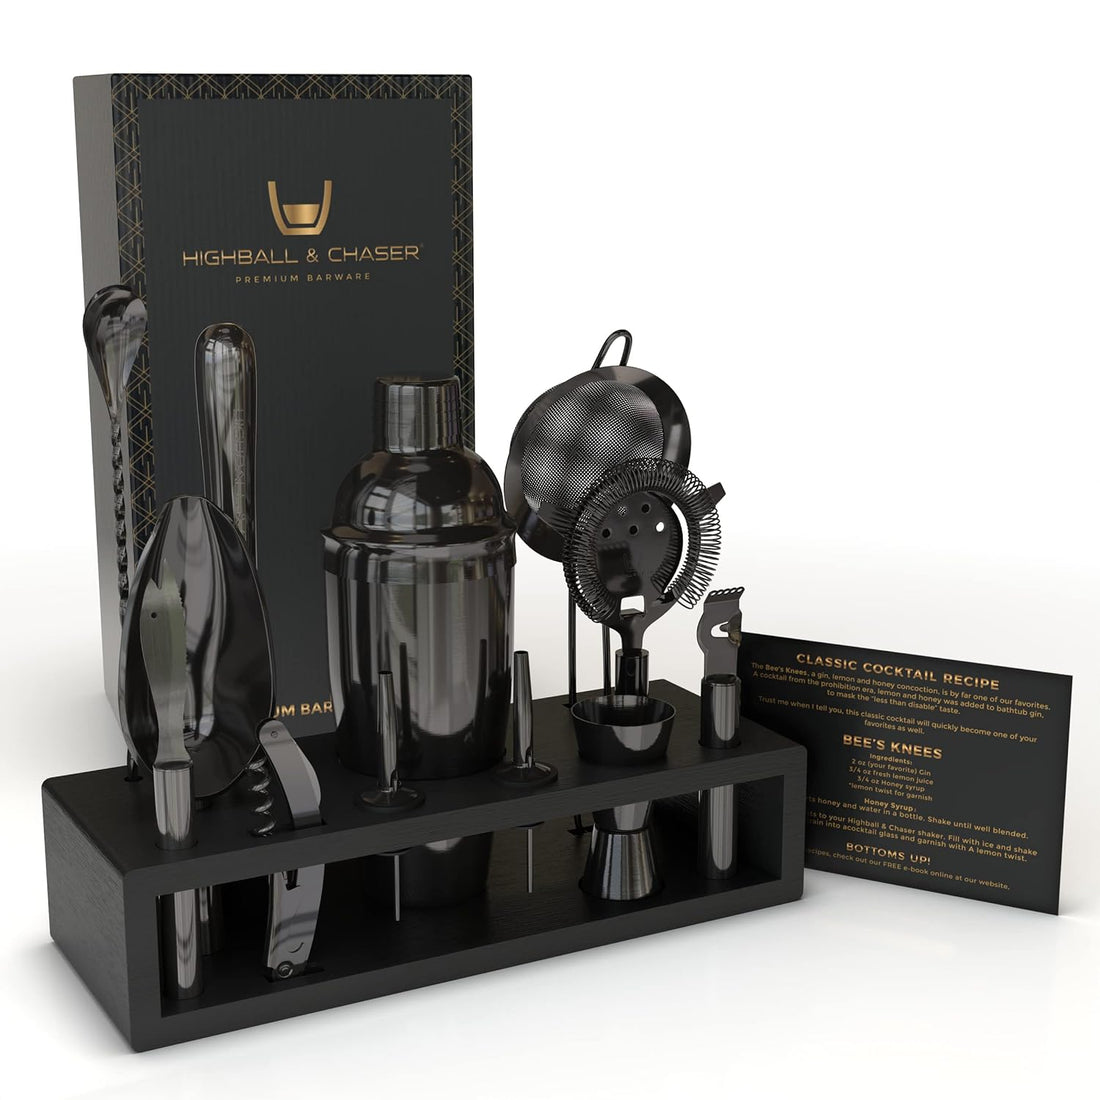 Highball & Chaser Gun Metal Black Plated Bartender Kit with Espresso Bamboo Stand. Beautiful Cobbler Cocktail Shaker Set with Highest Quality Bar Tools Rustproof Stainless Steel Bar Set